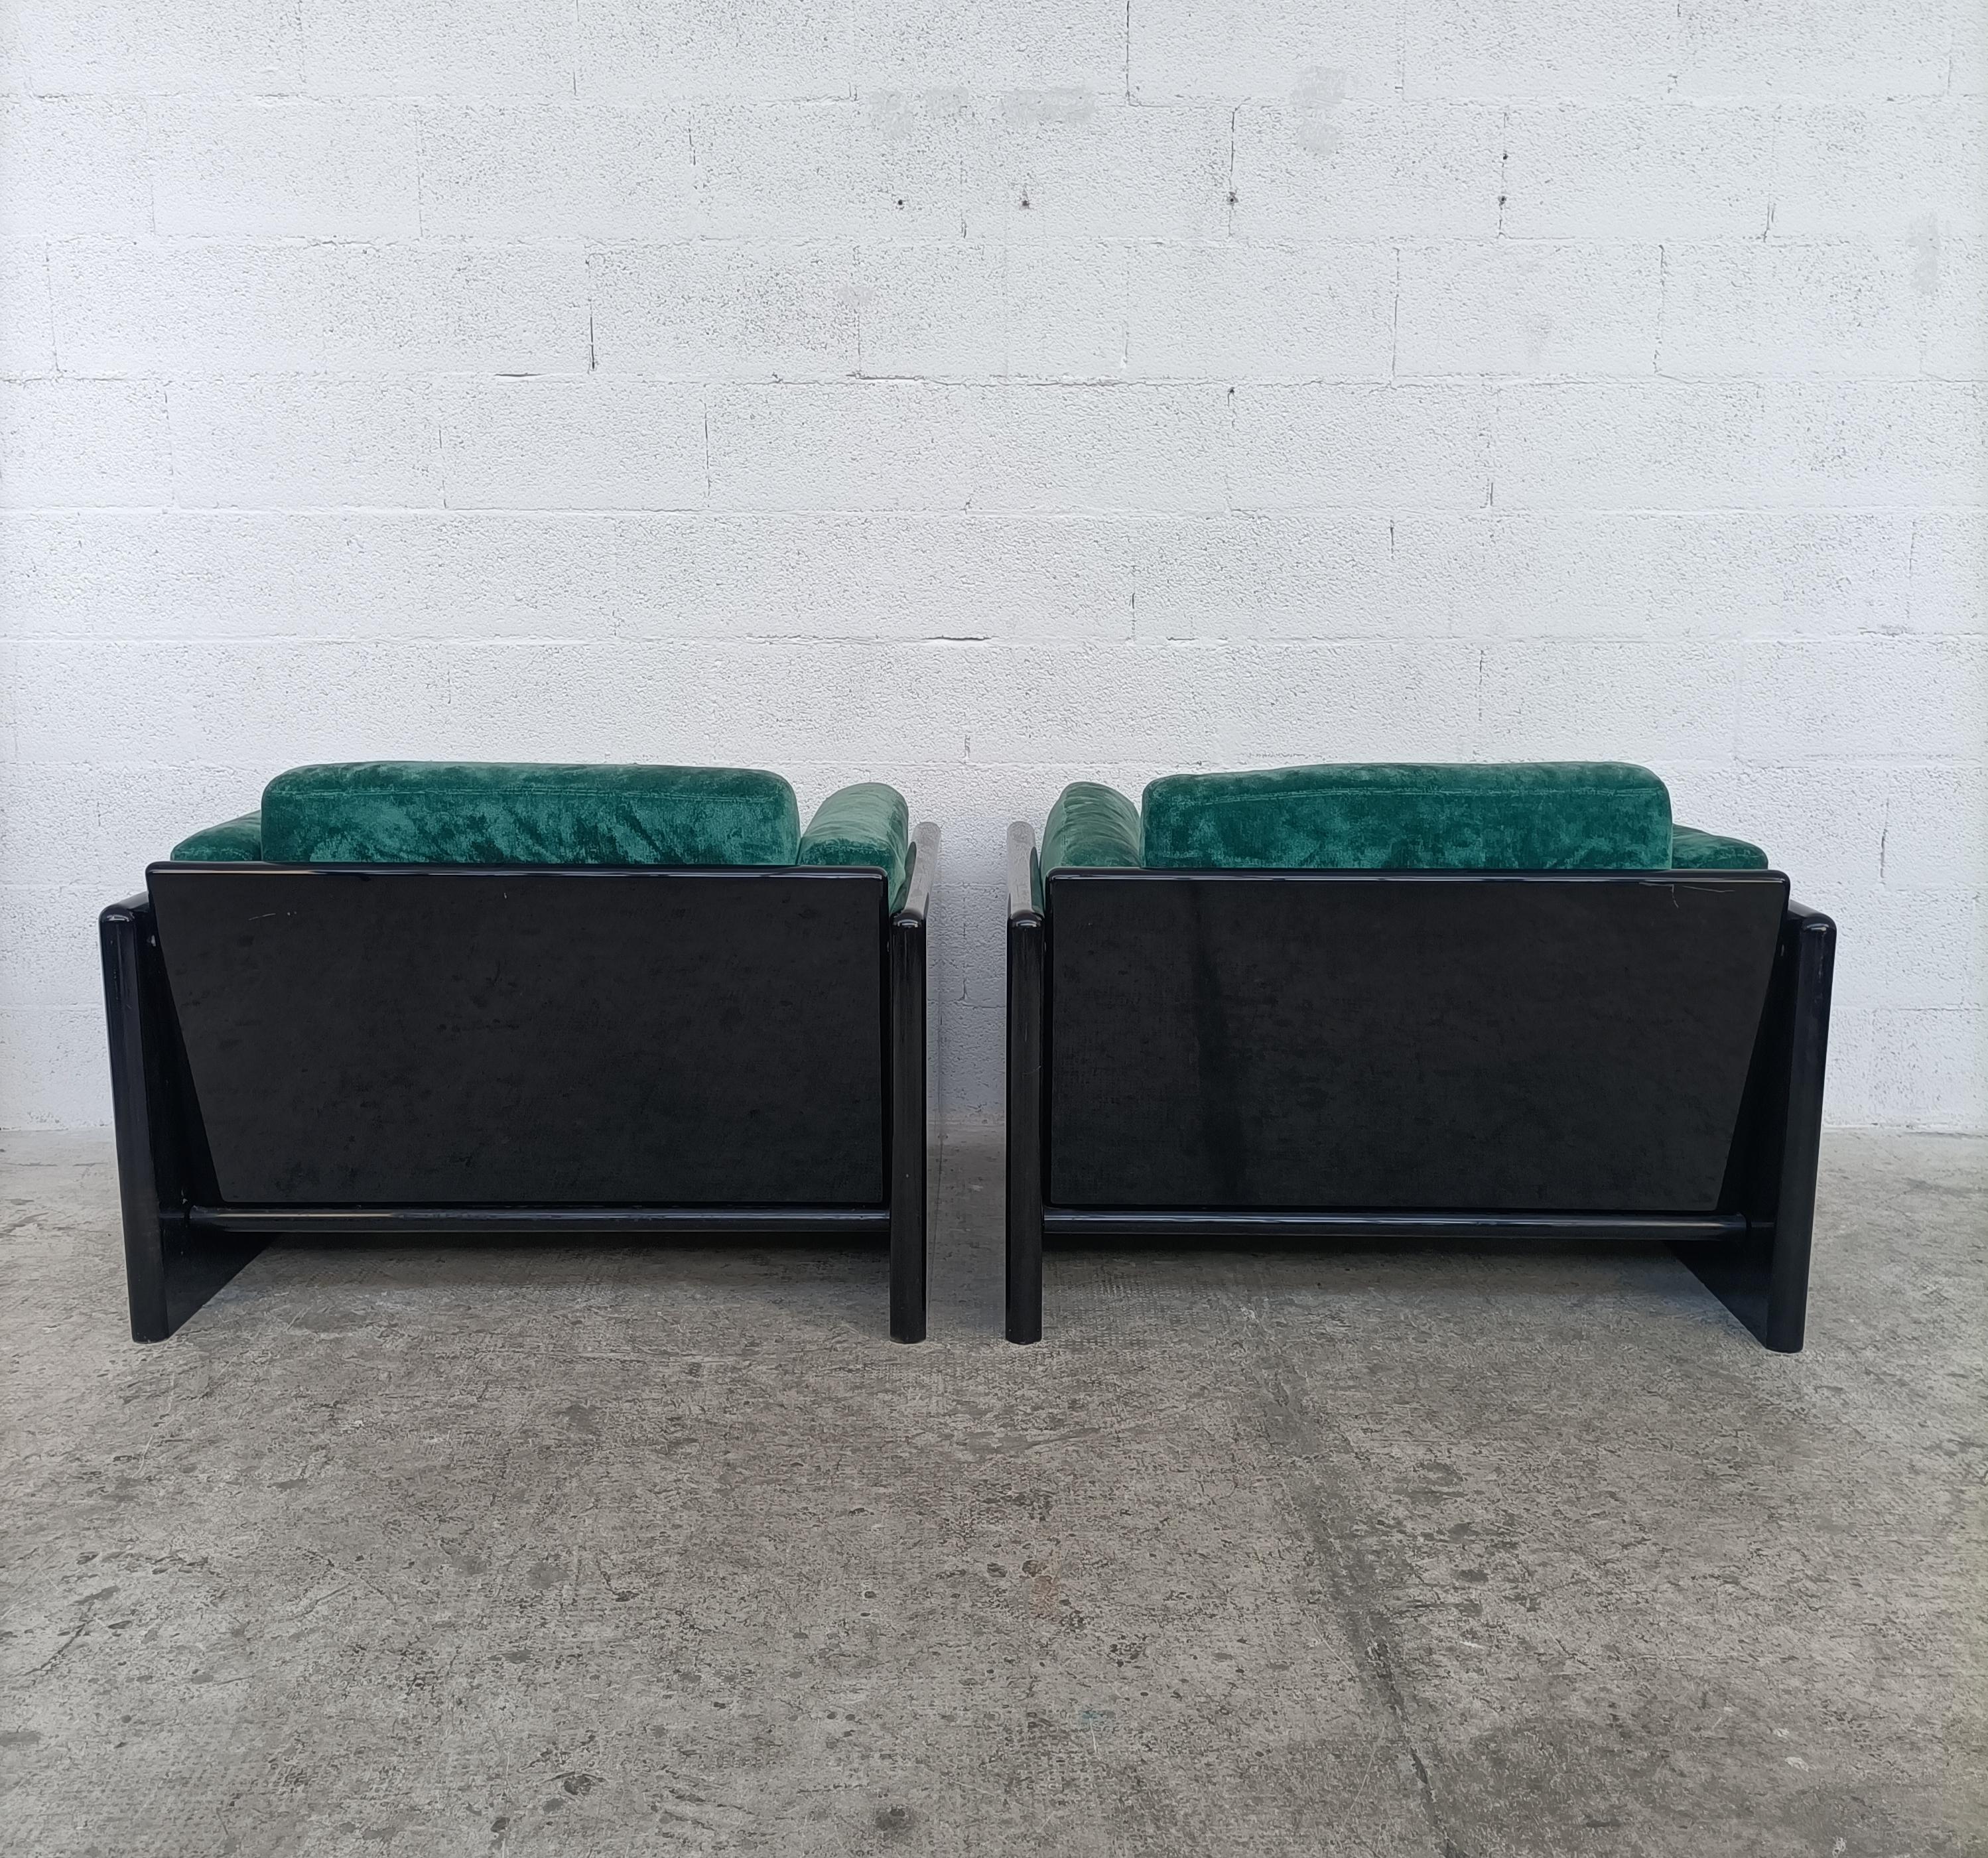 2 Lacquered and Green Velvet Simone Armchairs by Dino Gavina for Simon 70s 1